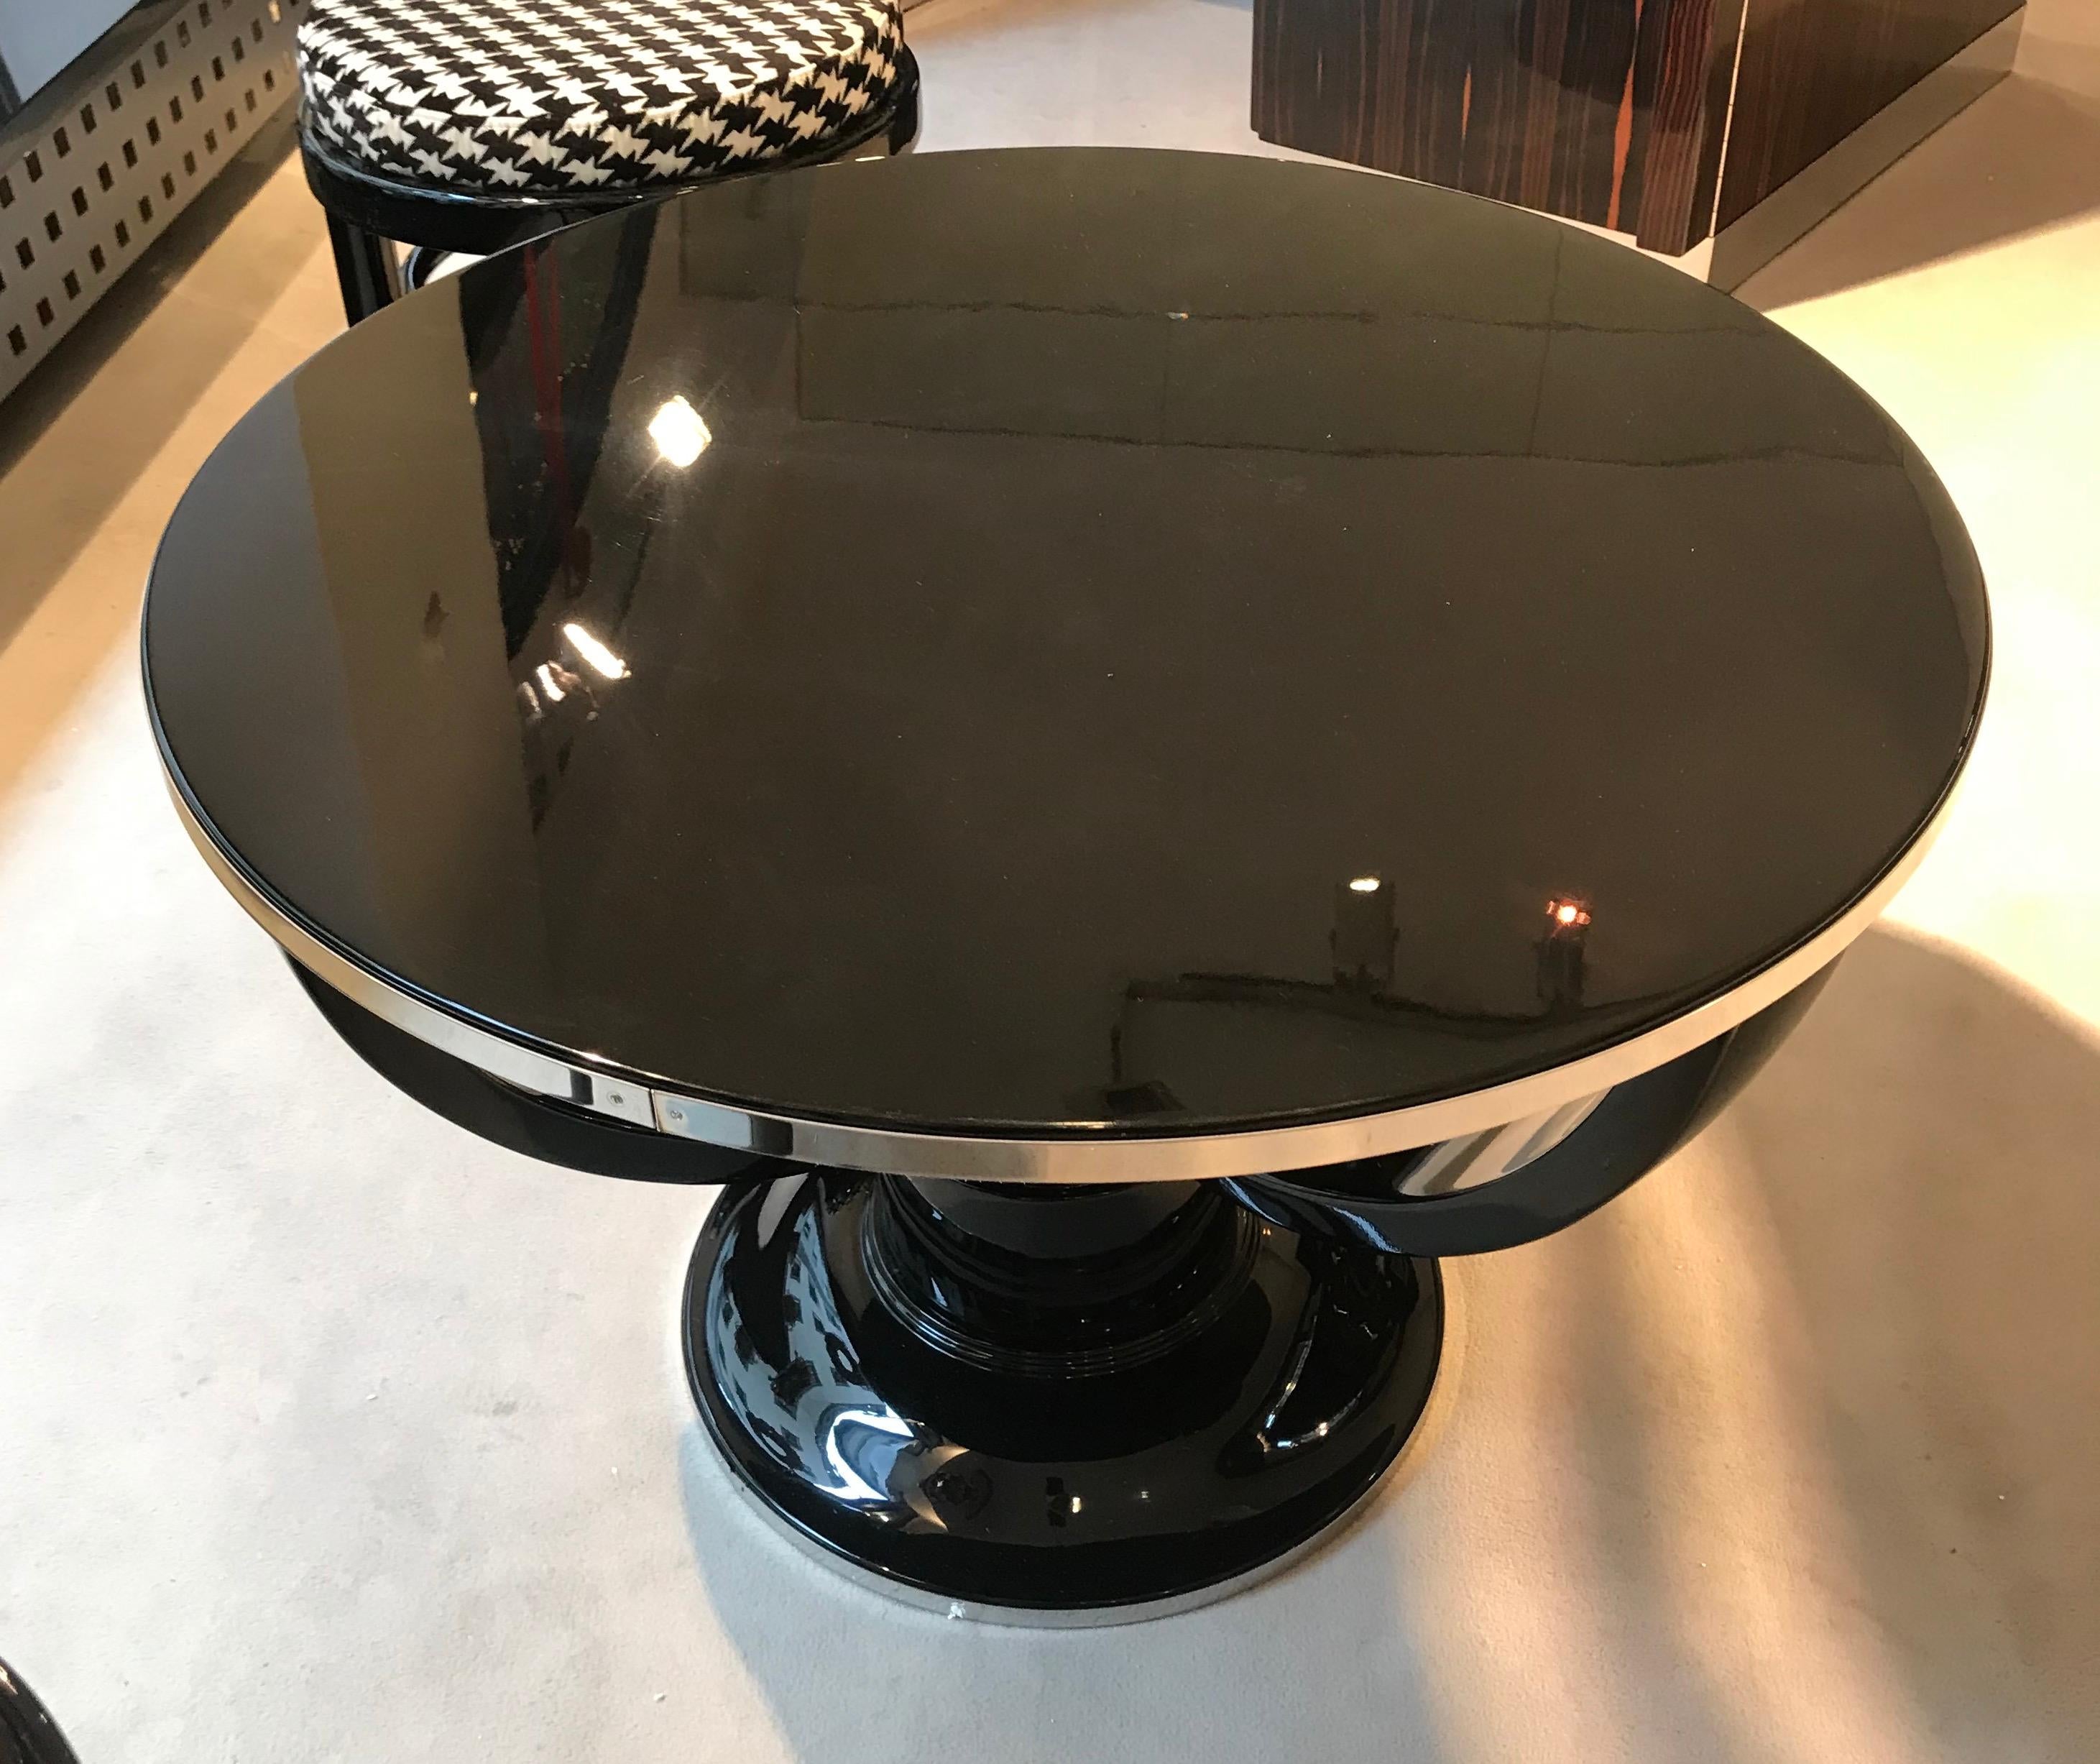 Very elegant, classic Art Deco Sofa / Side Table.

Blackened walnut wood, lacquered with Polyurethane and polished. Beautiful curved 4-edged legs.

Nickled and polished metal trim around the side of the plate. 

Round glass plate could be added for